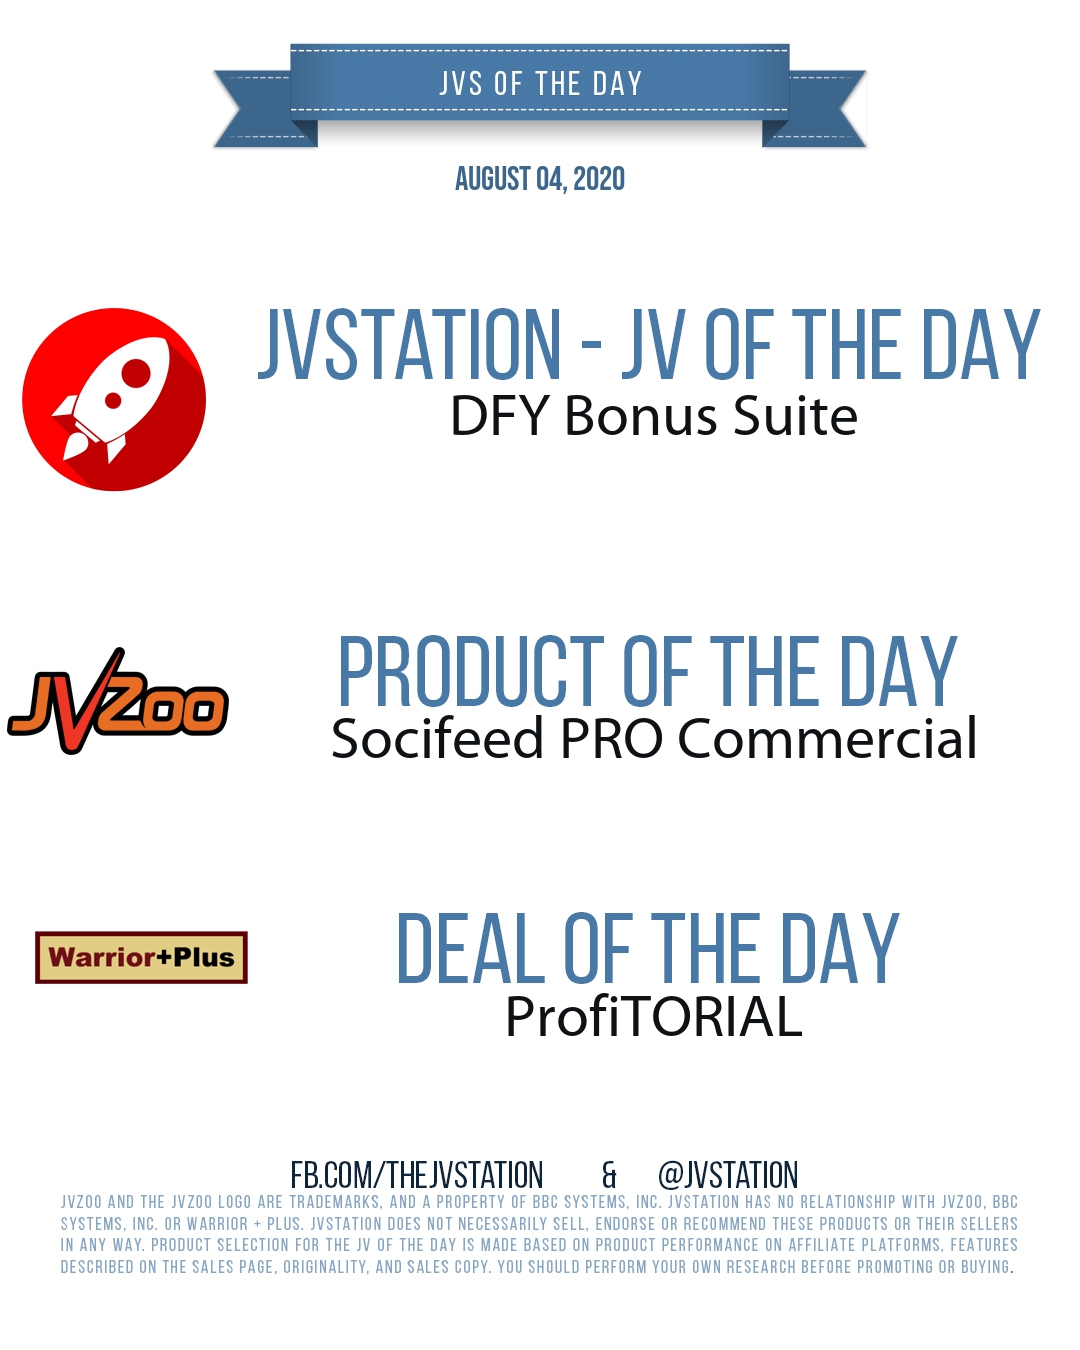 JVs of the day - August 04, 2020